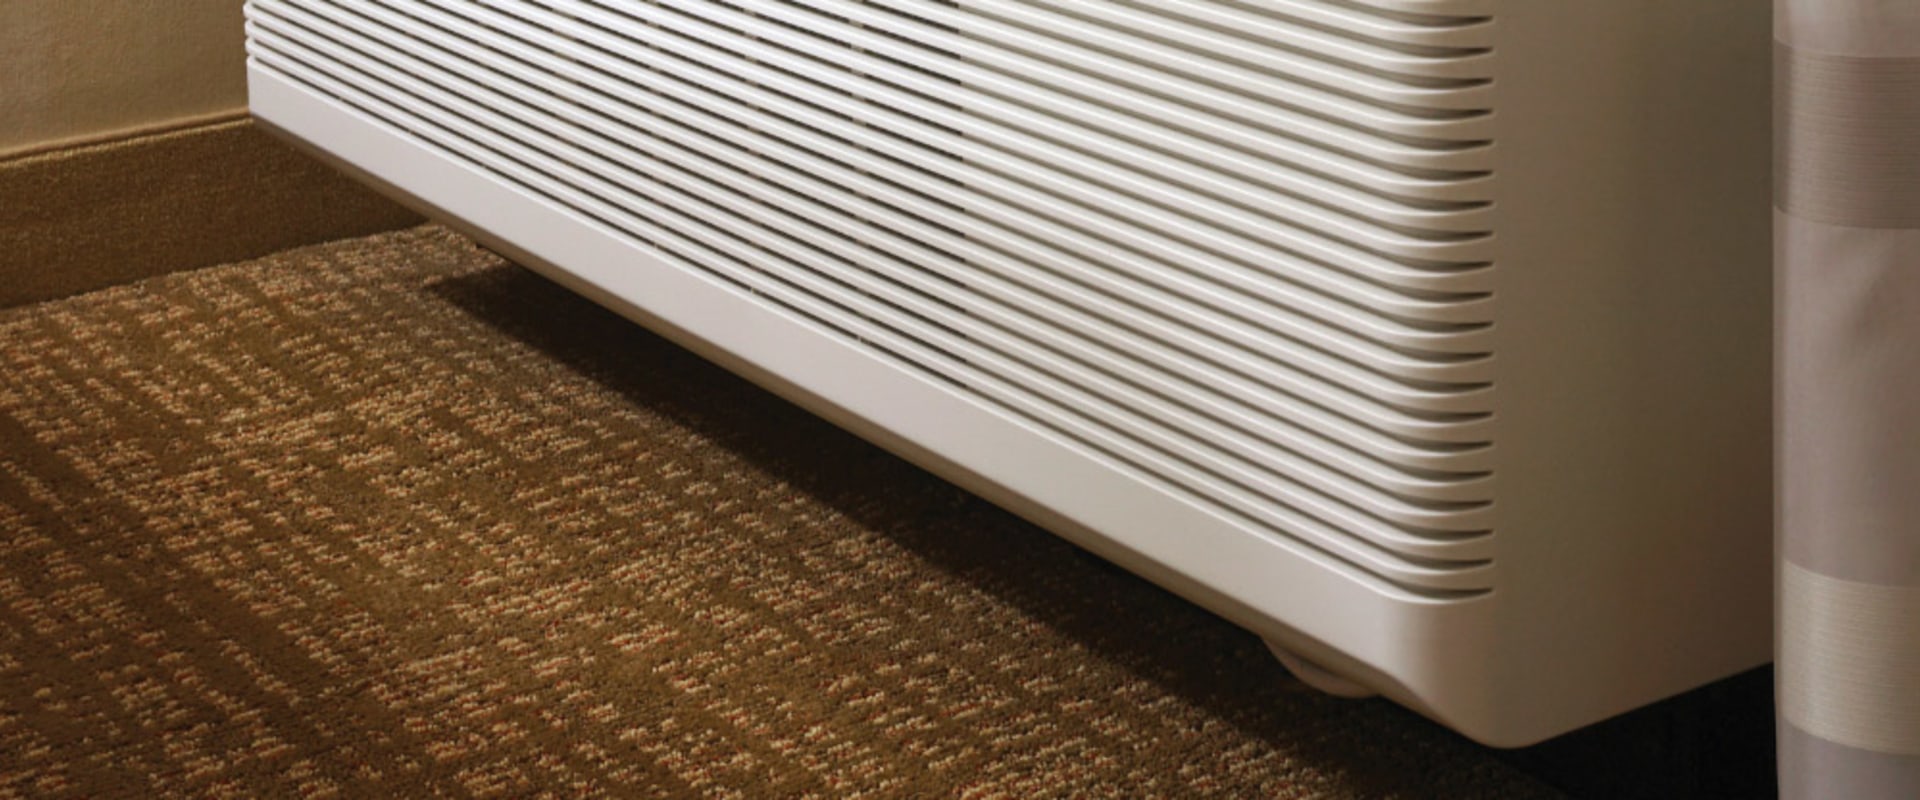 Choosing the Perfect Air Conditioning Brand for Your Home